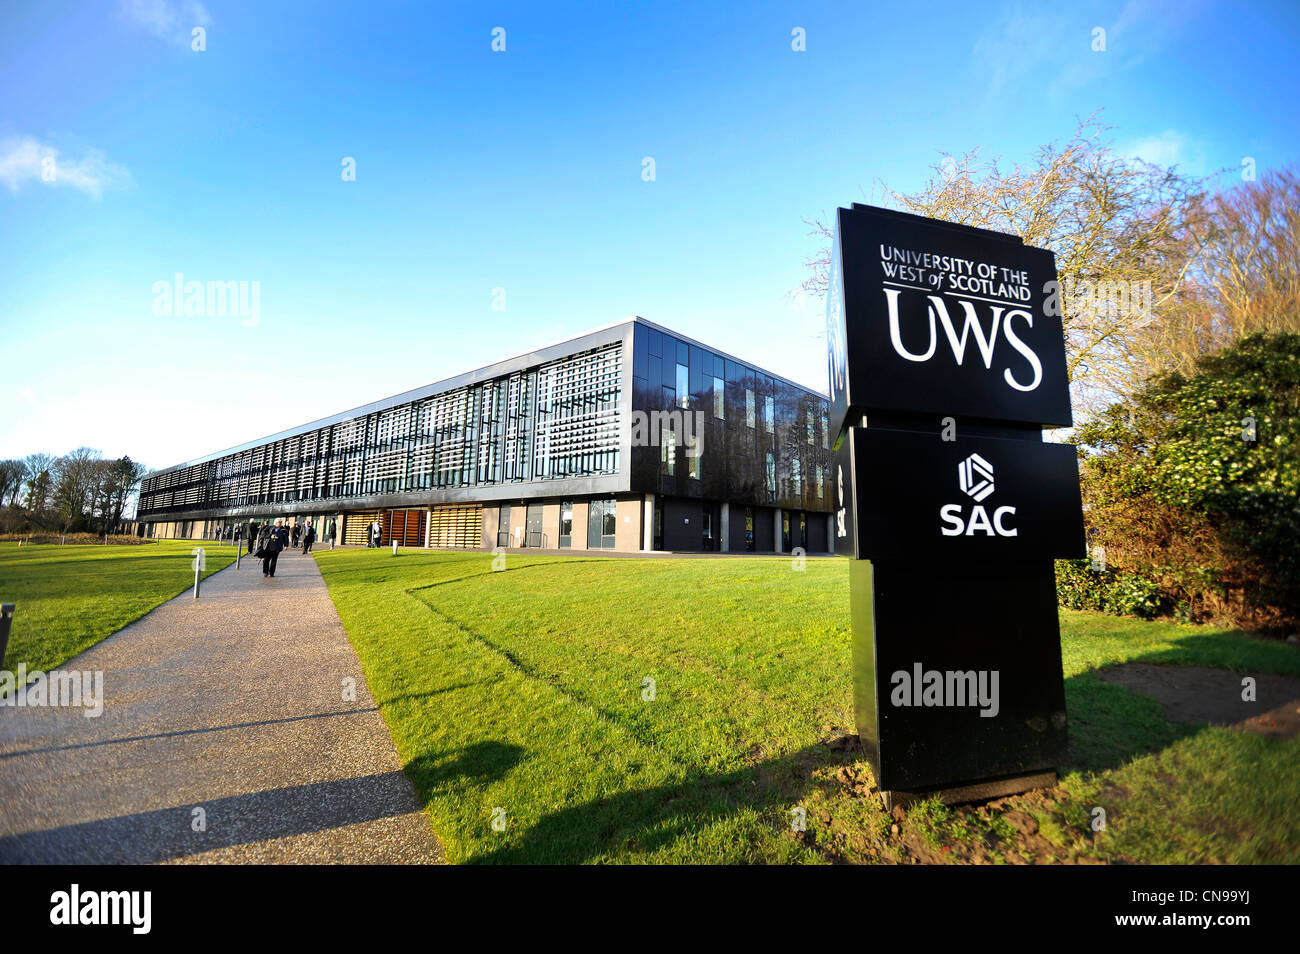 Exterior view of the new University of West of Scotland campus in Ayr, Ayrshire, Scotland. Stock Photo